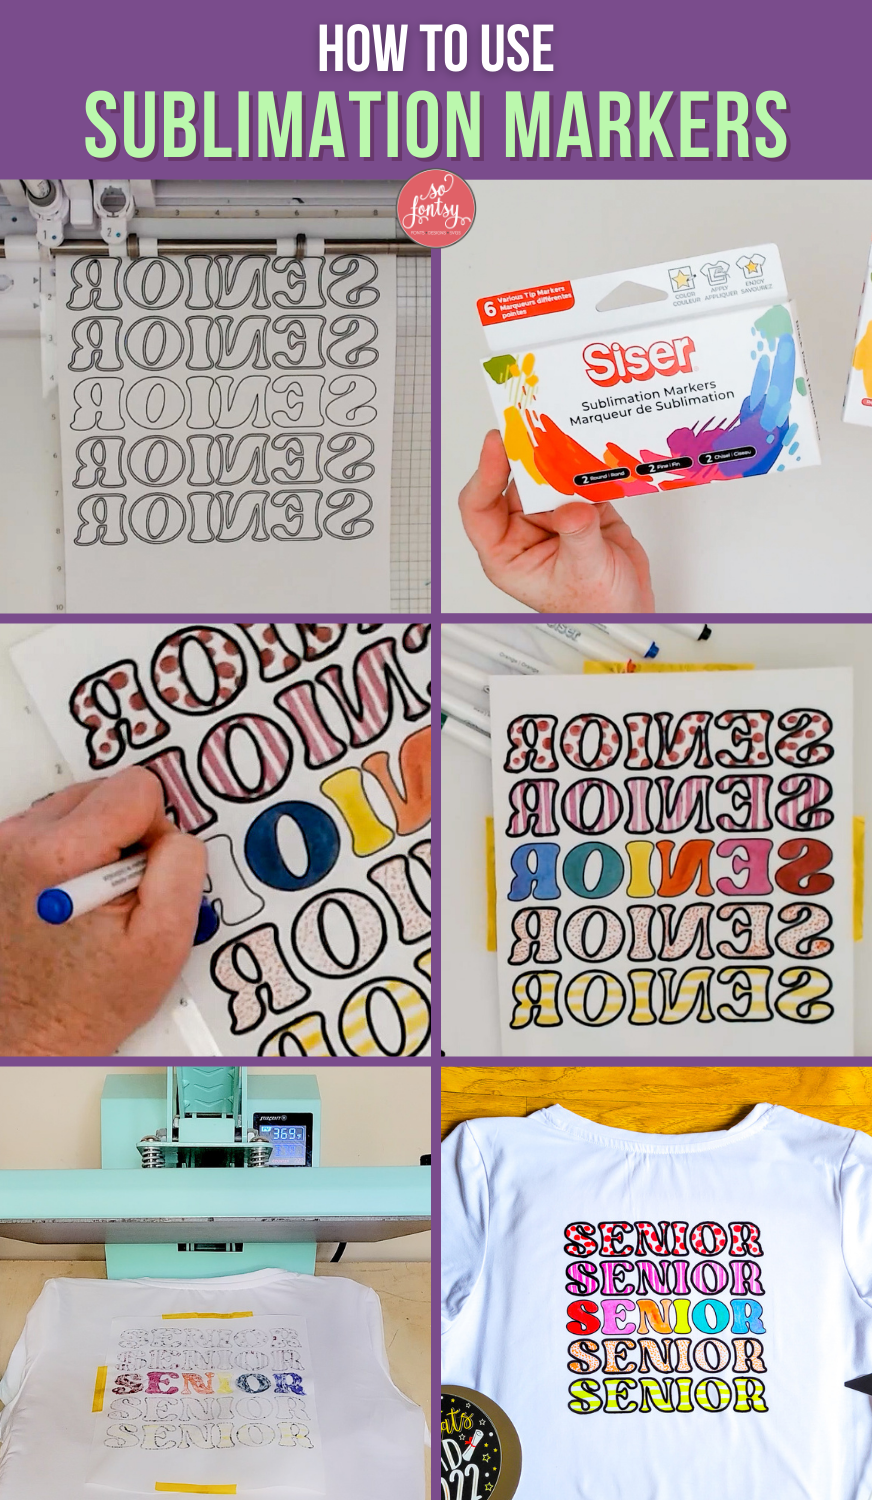 Step by Step Tutorial on How to Use Sublimation Markers